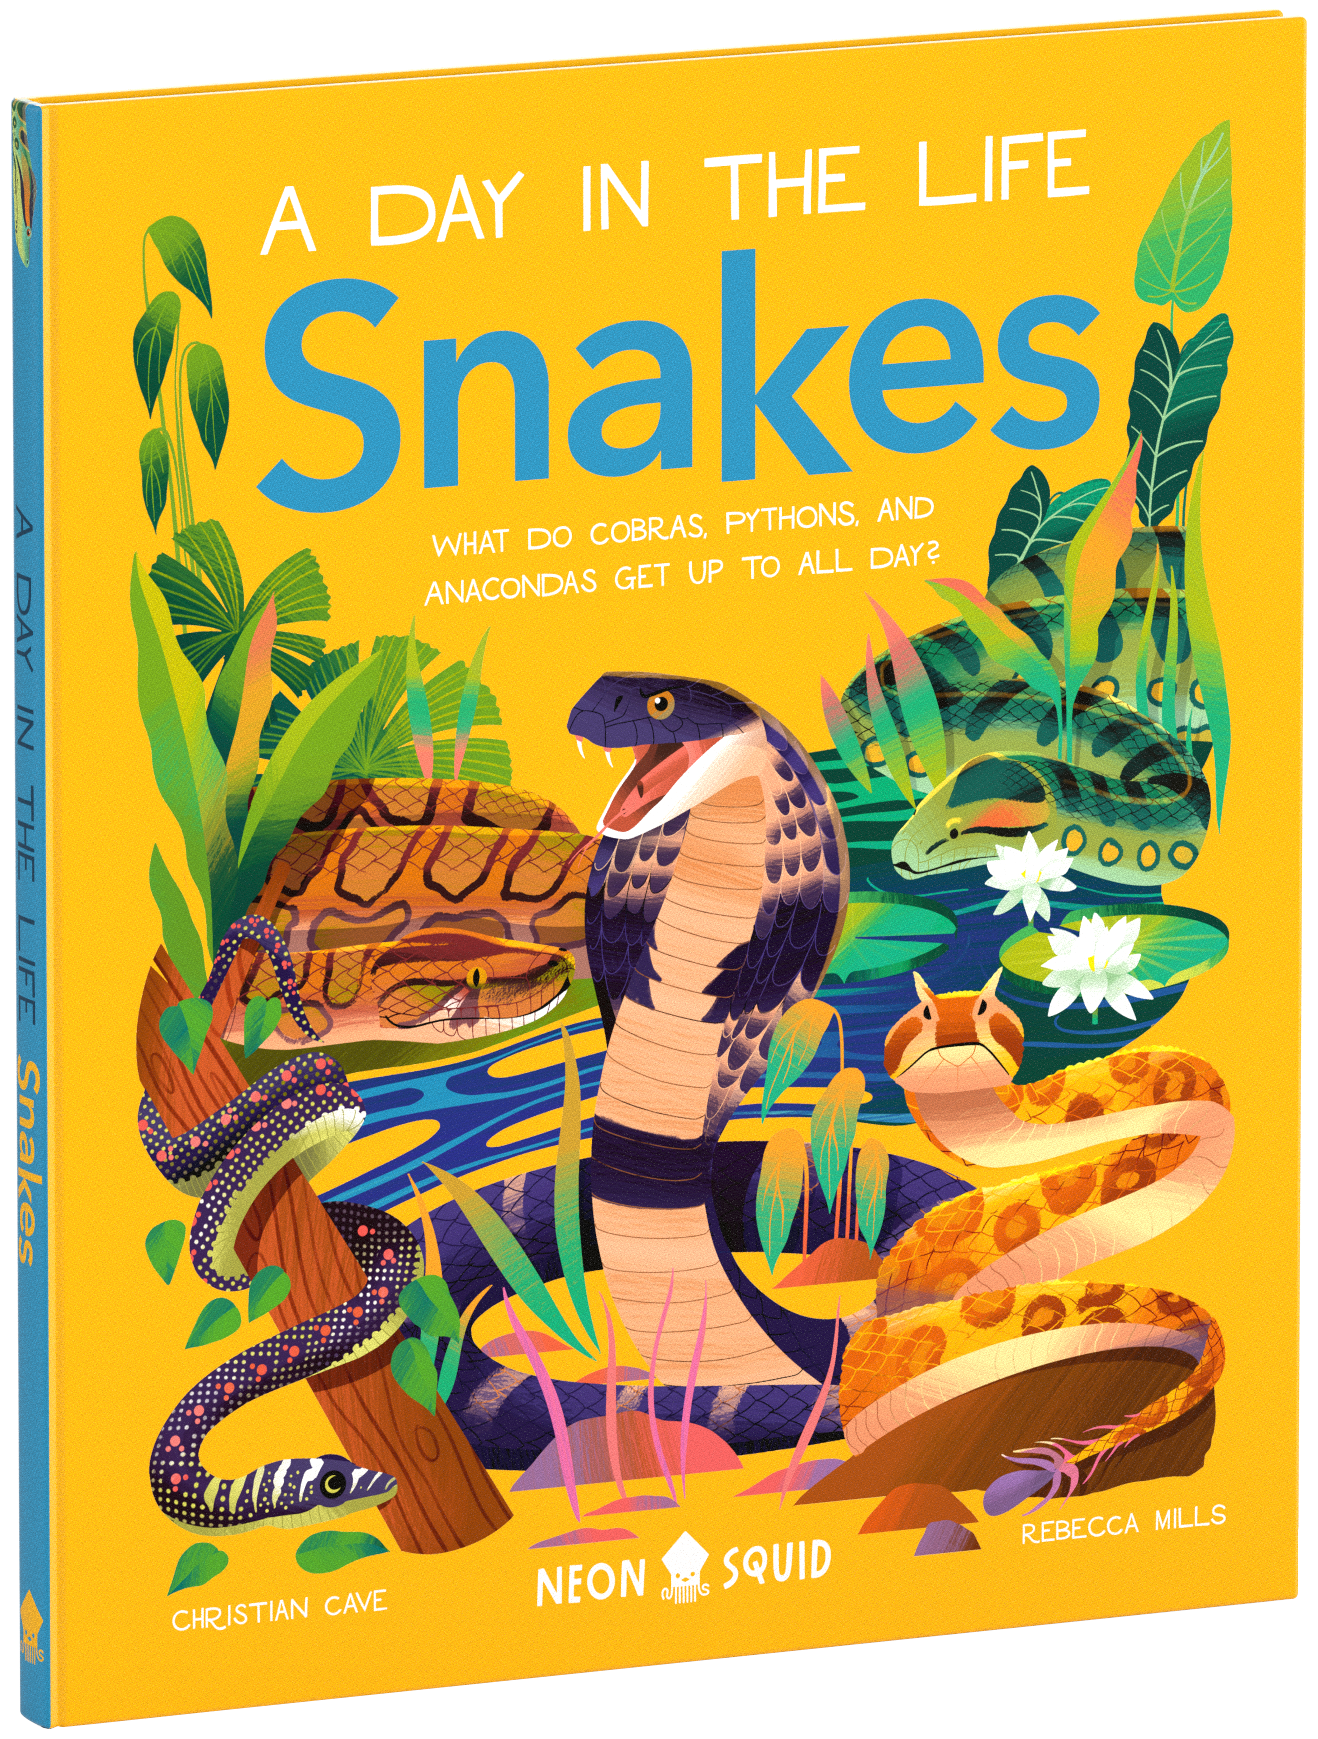 Illustrated book cover titled "a day in the life: snakes," featuring vibrant images of various snakes like cobras, pythons, and anacondas amidst lush greenery and flowers.